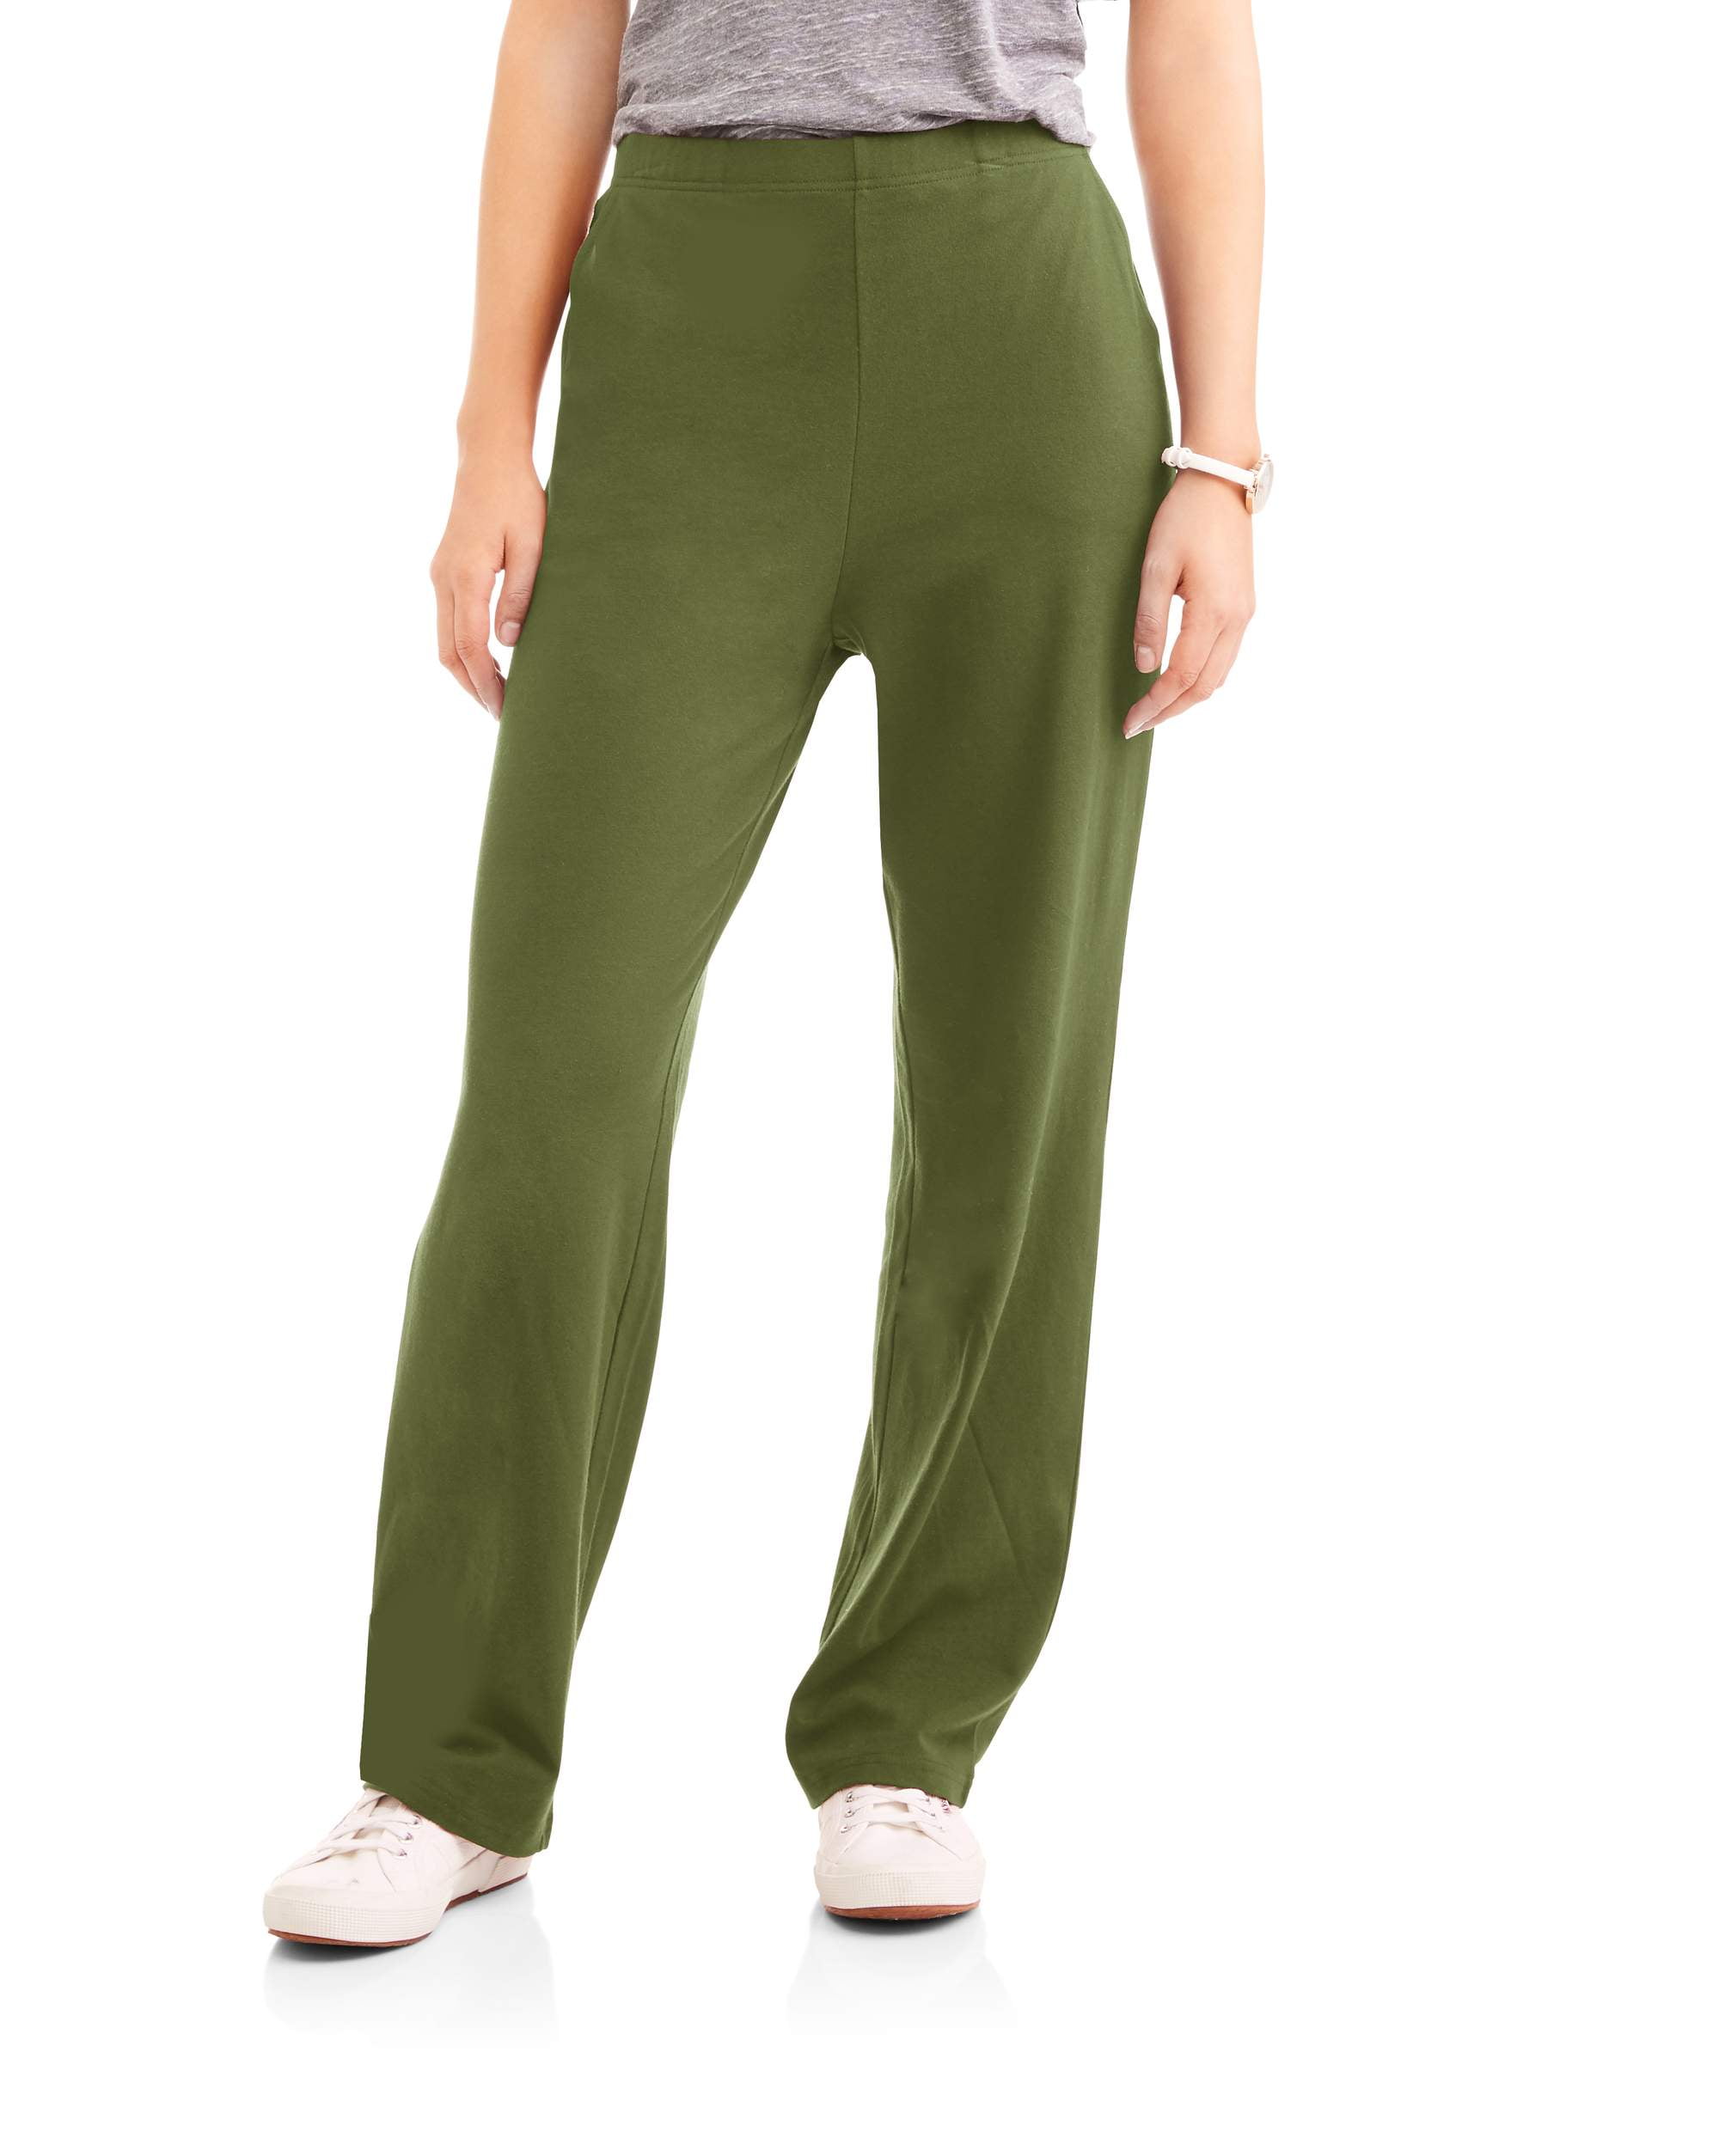 Women's Knit Pull-On Pant Available in Regular and Petite - Walmart.com